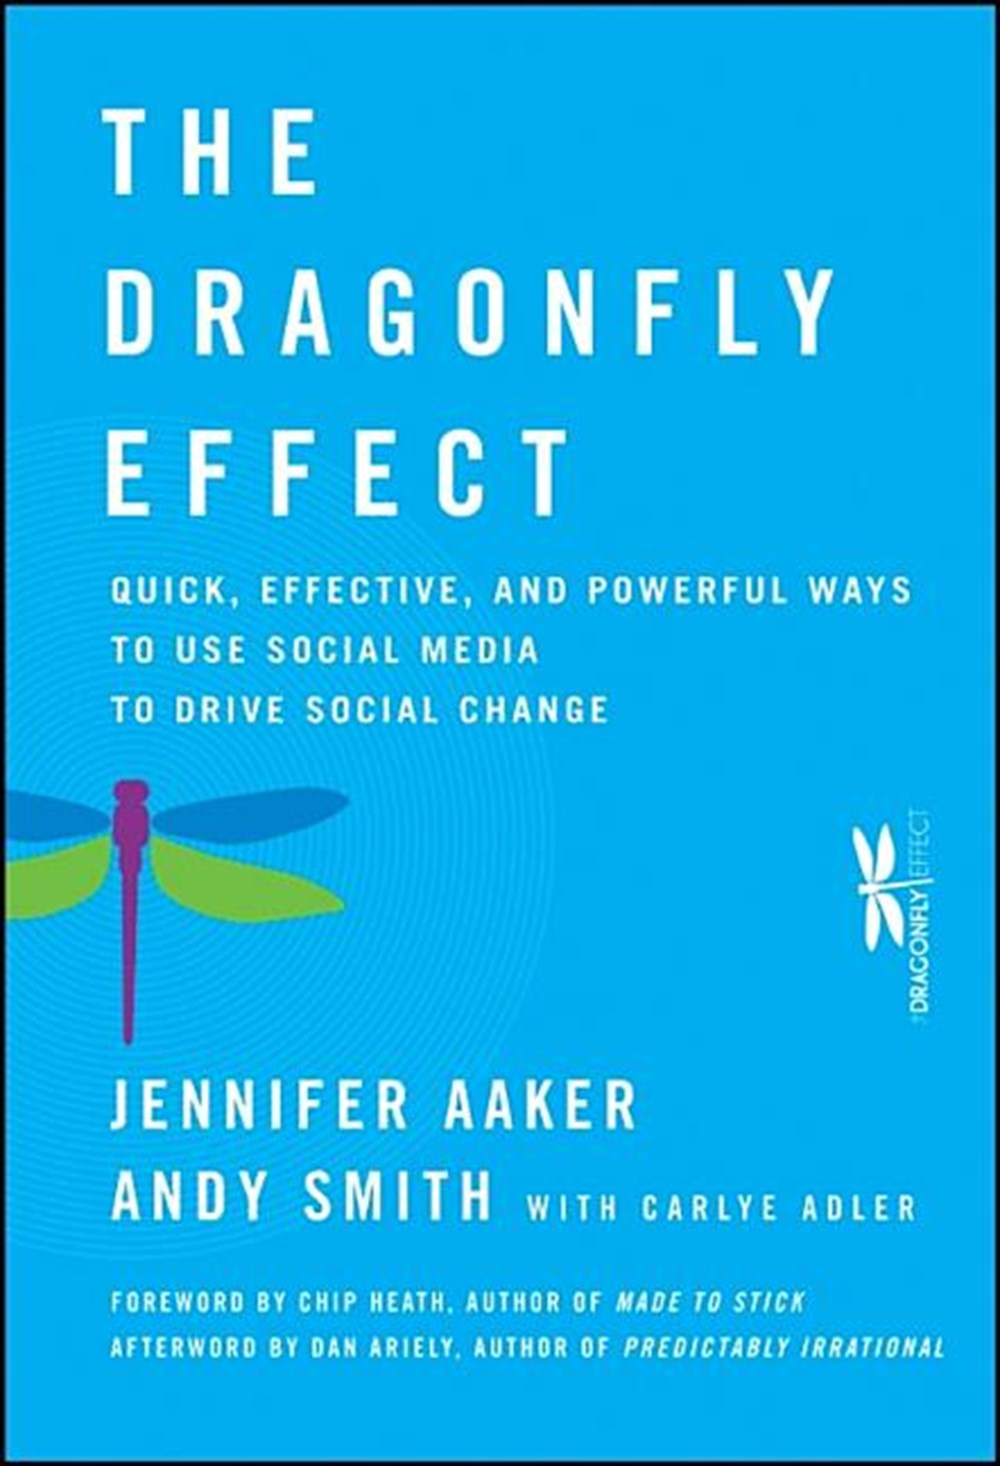 Dragonfly Effect Quick, Effective, and Powerful Ways to Use Social Media to Drive Social Change